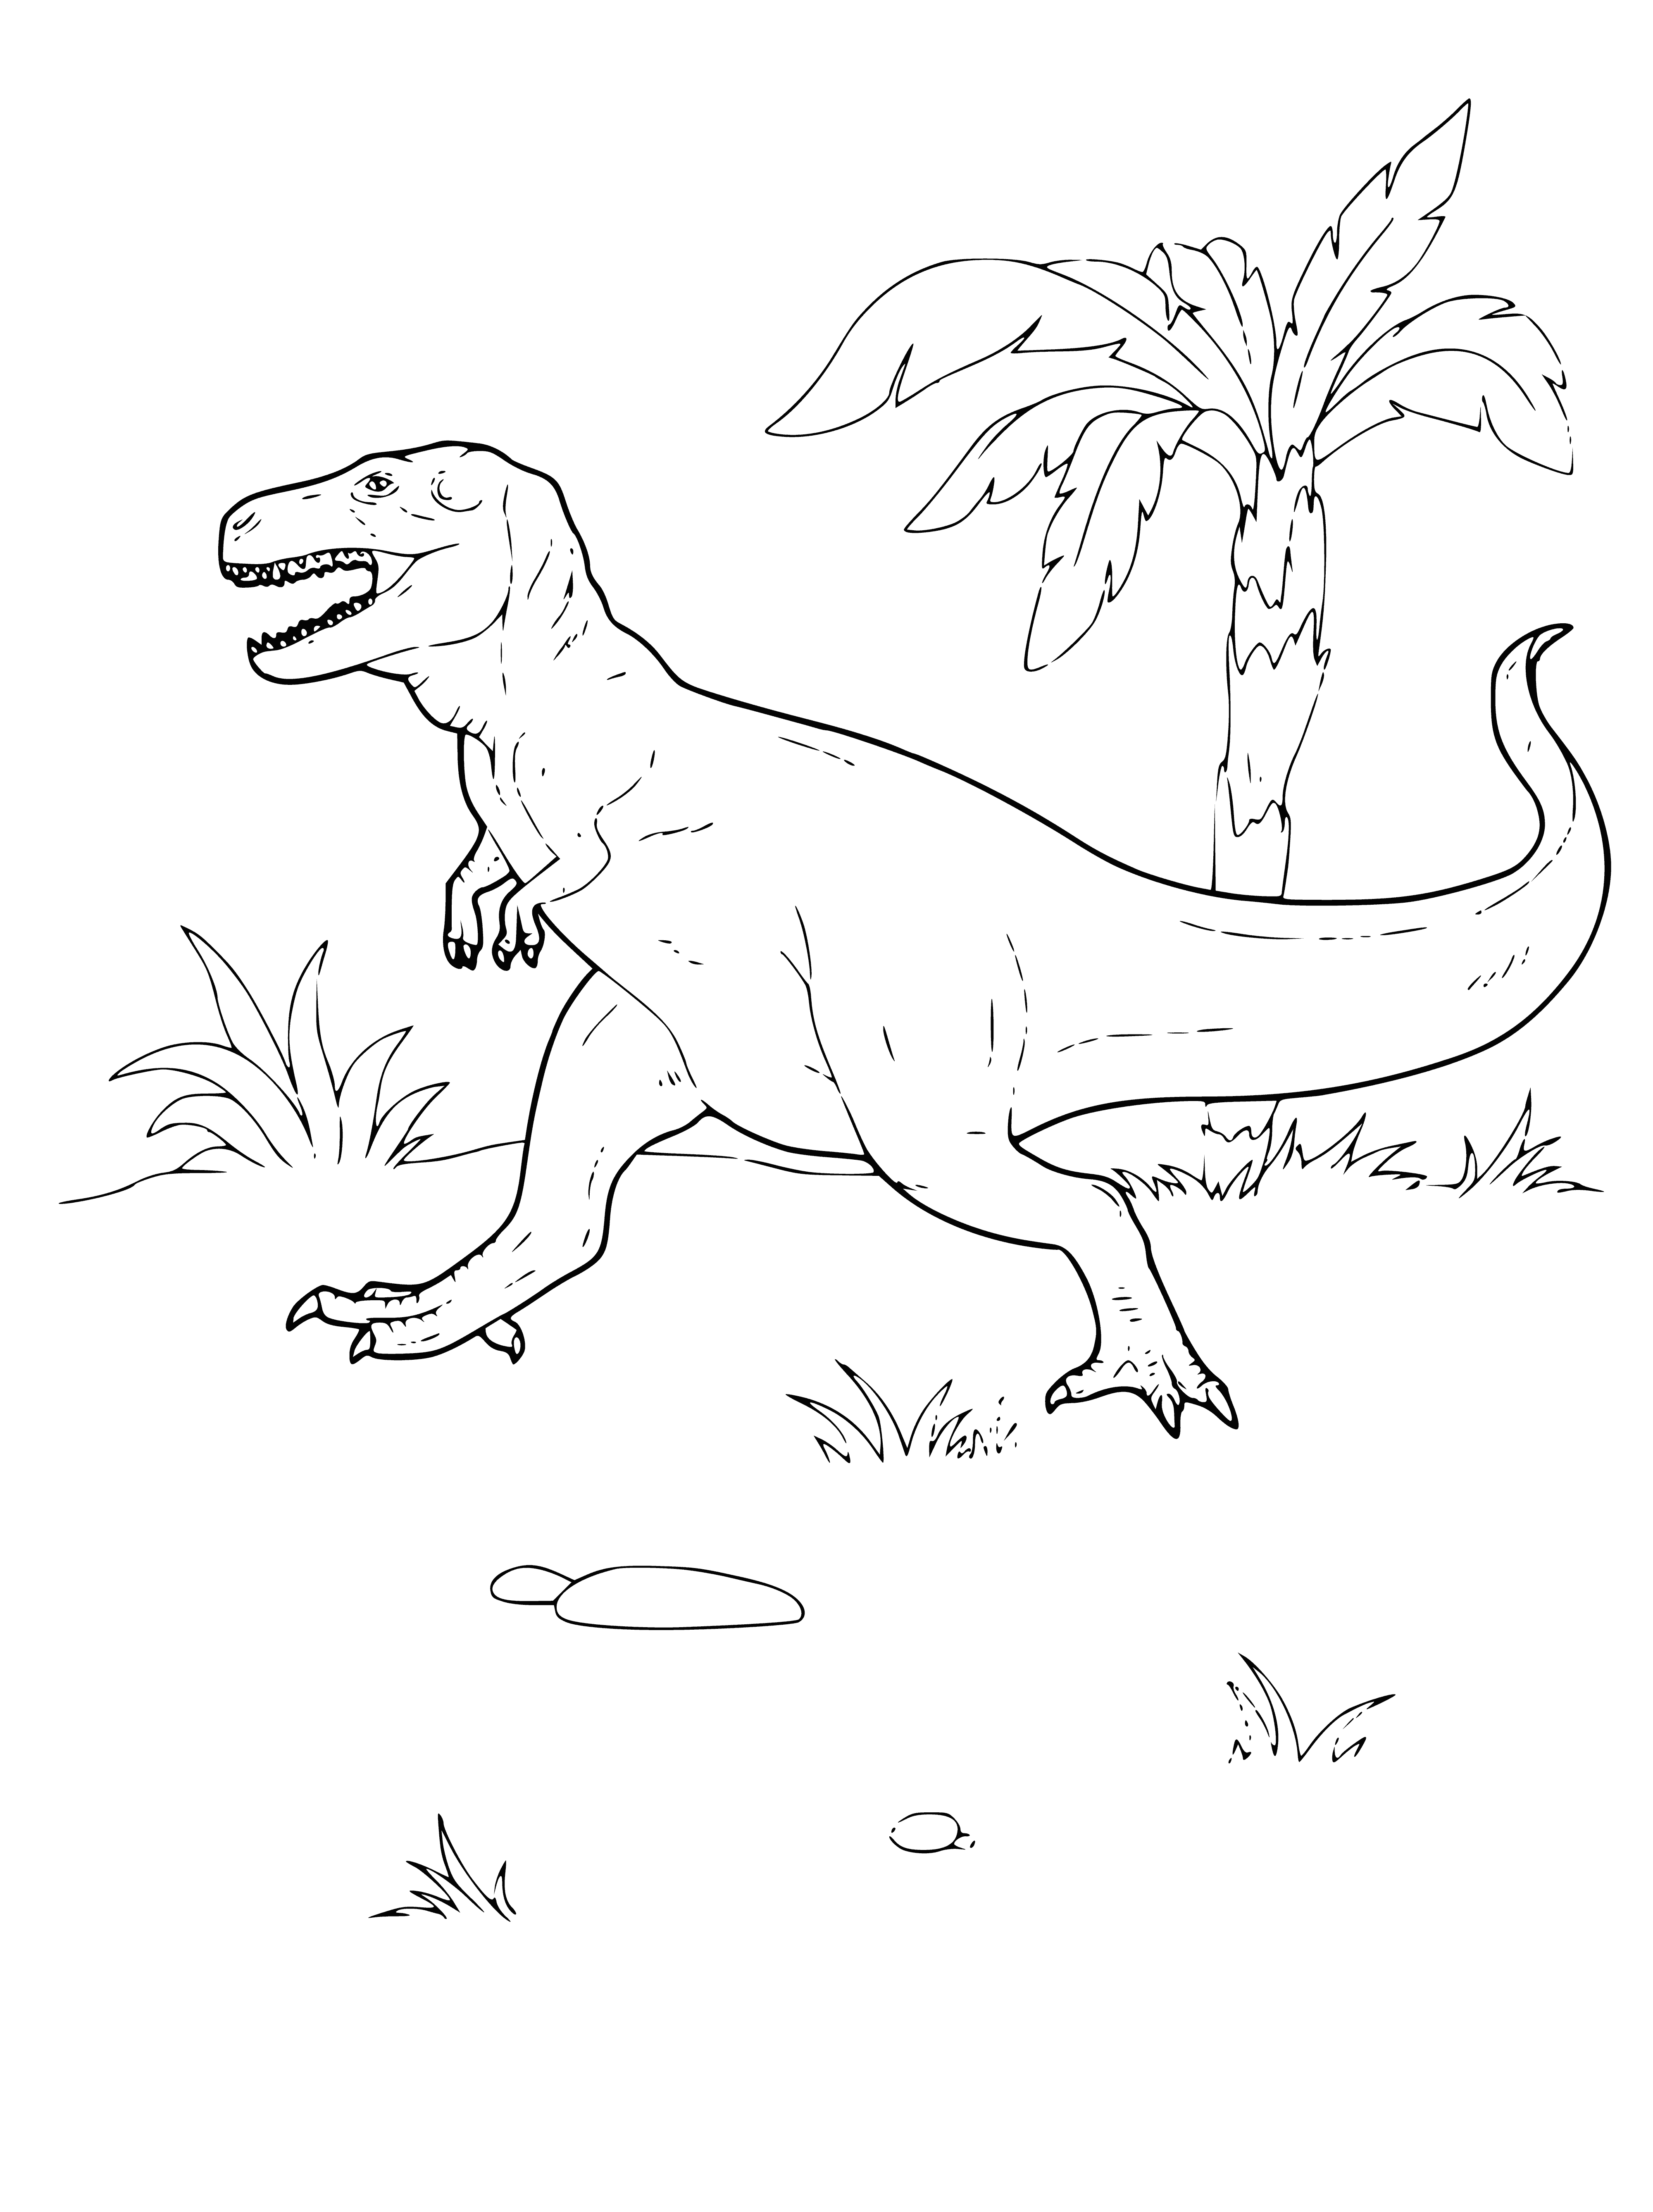 coloring page: Dinosaur w/ long neck, small head, sharp teeth; Strong legs w/ clawed feet; Stiff tail for balance; Scaly, greenish-brown skin.